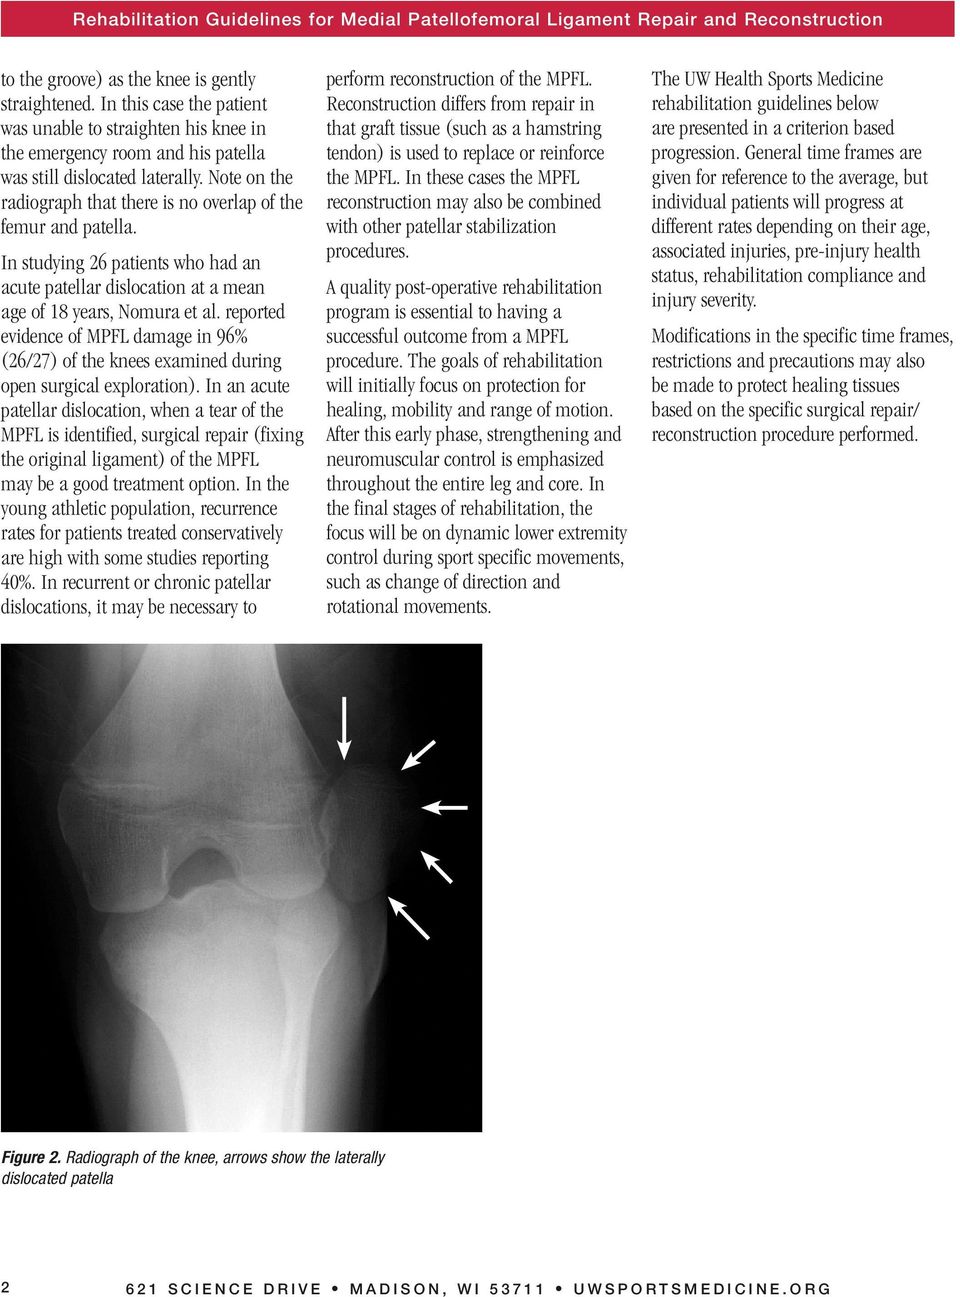 reported evidence of MPFL damage in 96% (26/27) of the knees examined during open surgical exploration).